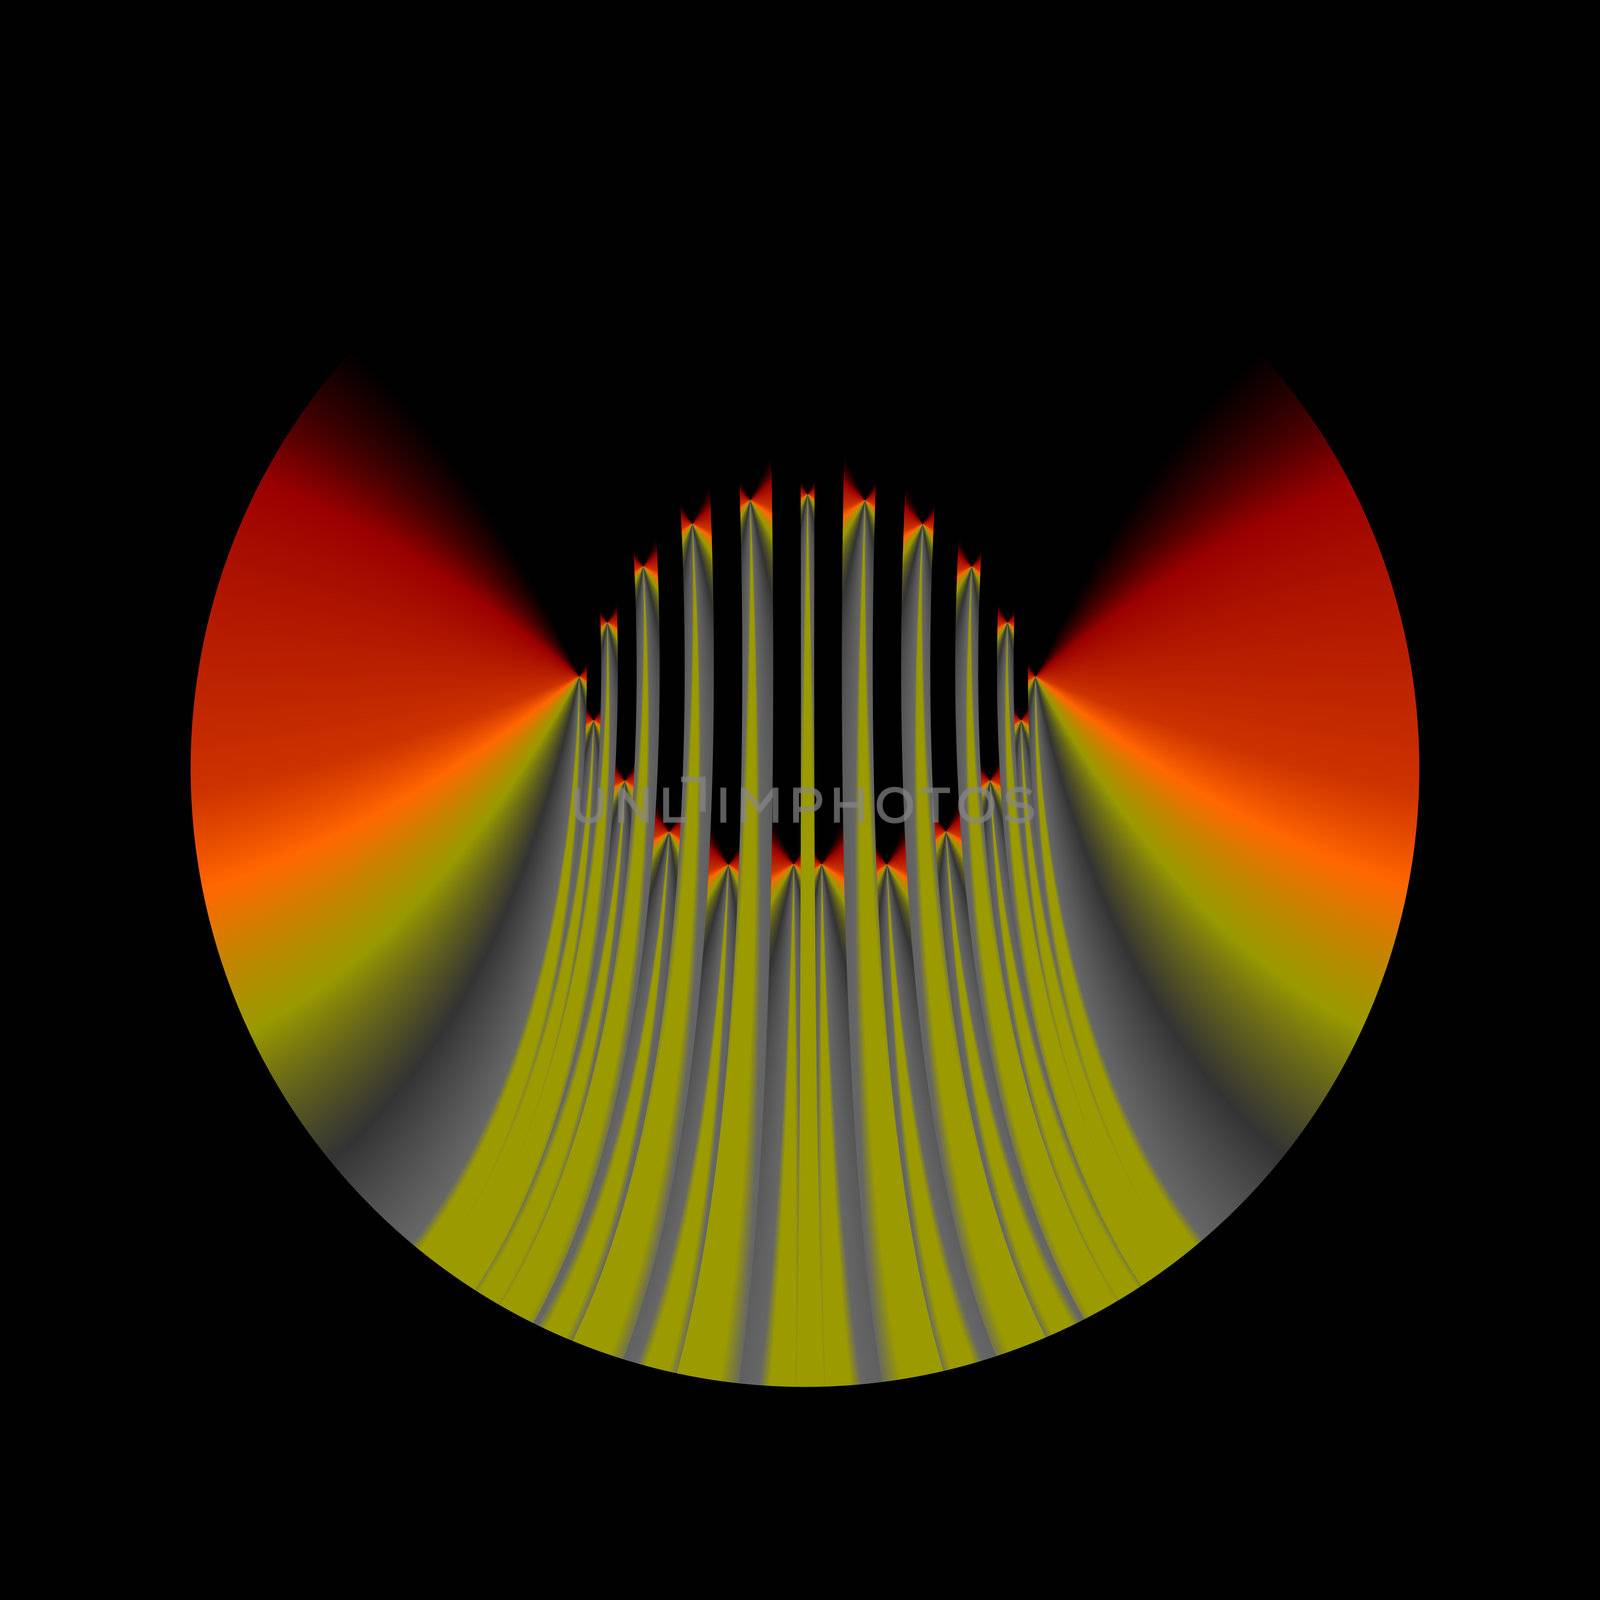 A fractal done in warm tones of orange and green with gray accents. The vertical lines in the central portion of the illustration give the illusion of acceleration.